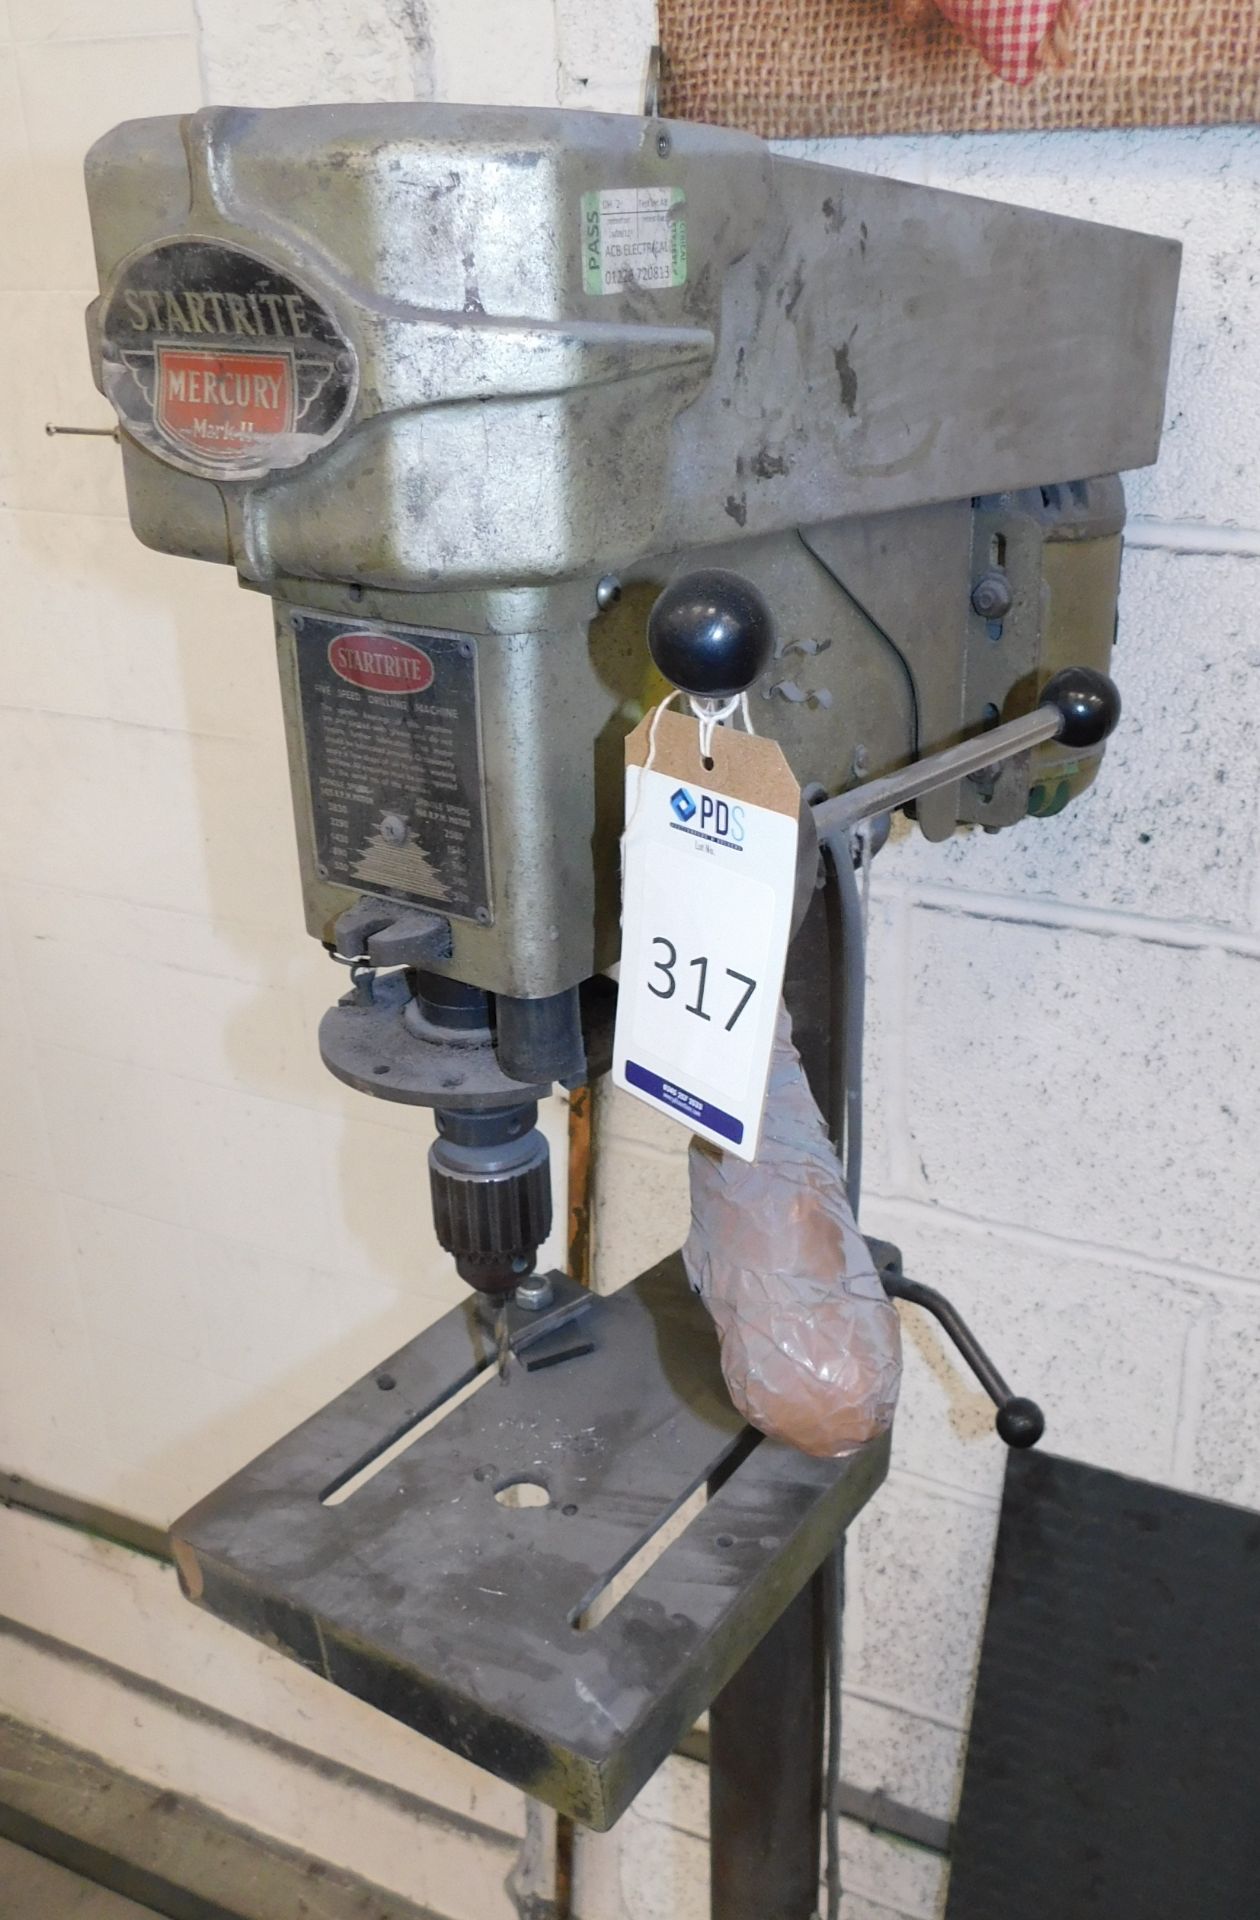 Startrite Mercury Mk II 5-Speed Pedestal Drill (Location: Sheffield. Please Refer to General Notes) - Image 2 of 3